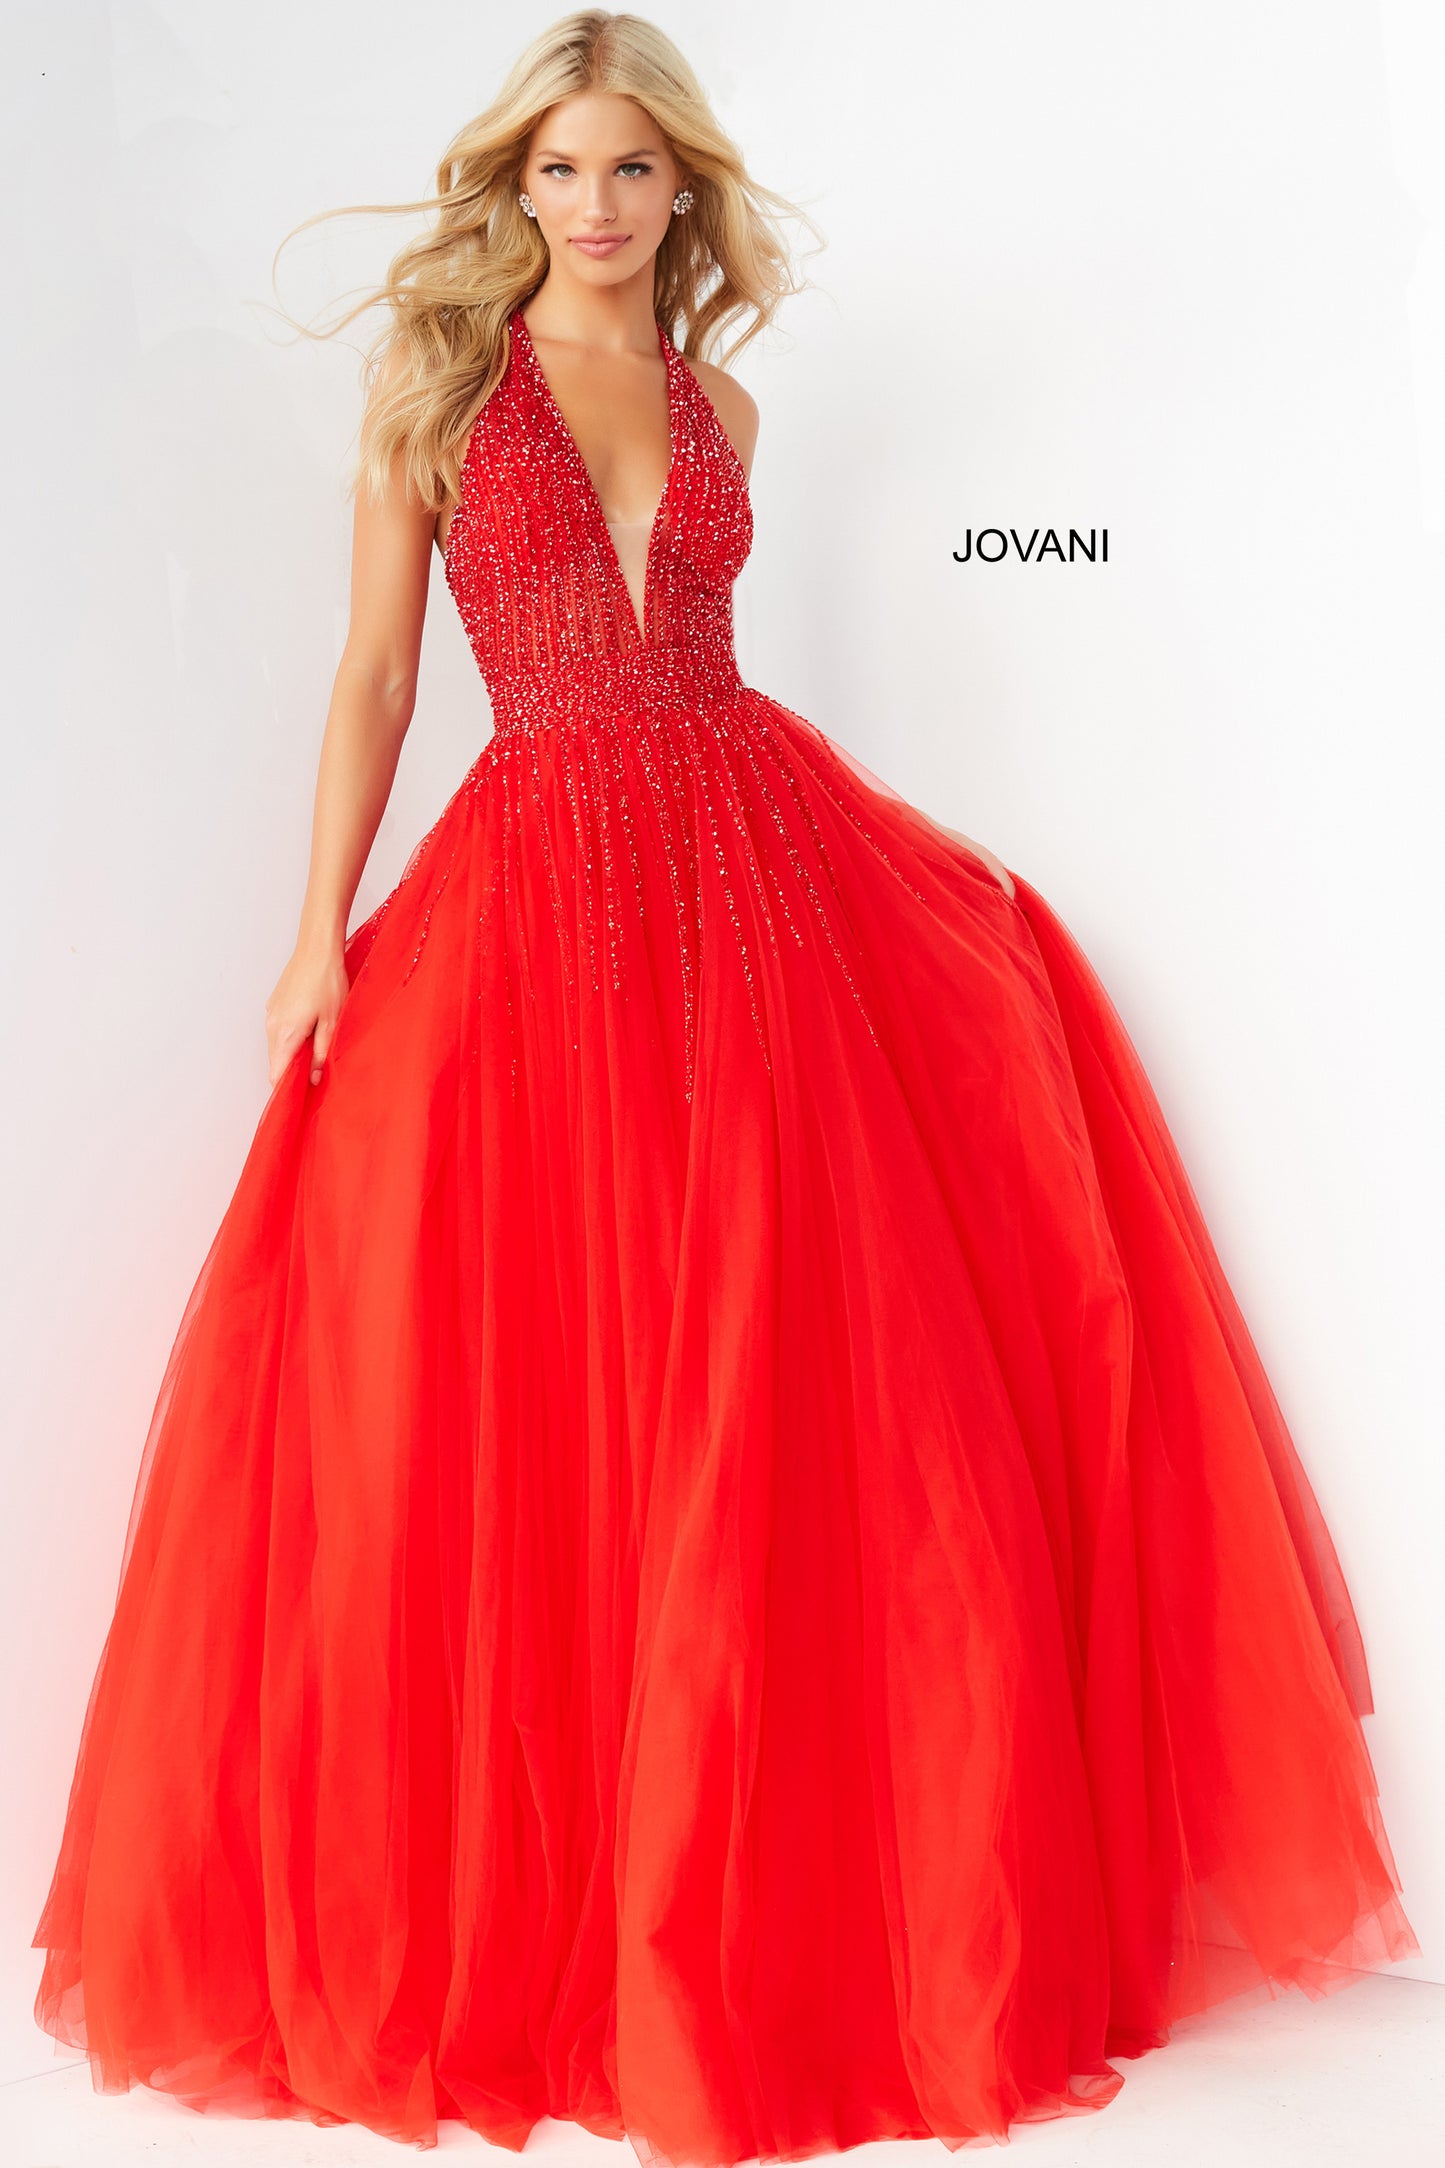 Jovani 06598 Long  Ballgown Prom Pageant Gown V Neck Dress Halter Formal A Line  Available Size- 00-24  Available Color- Red, Black, Ivory